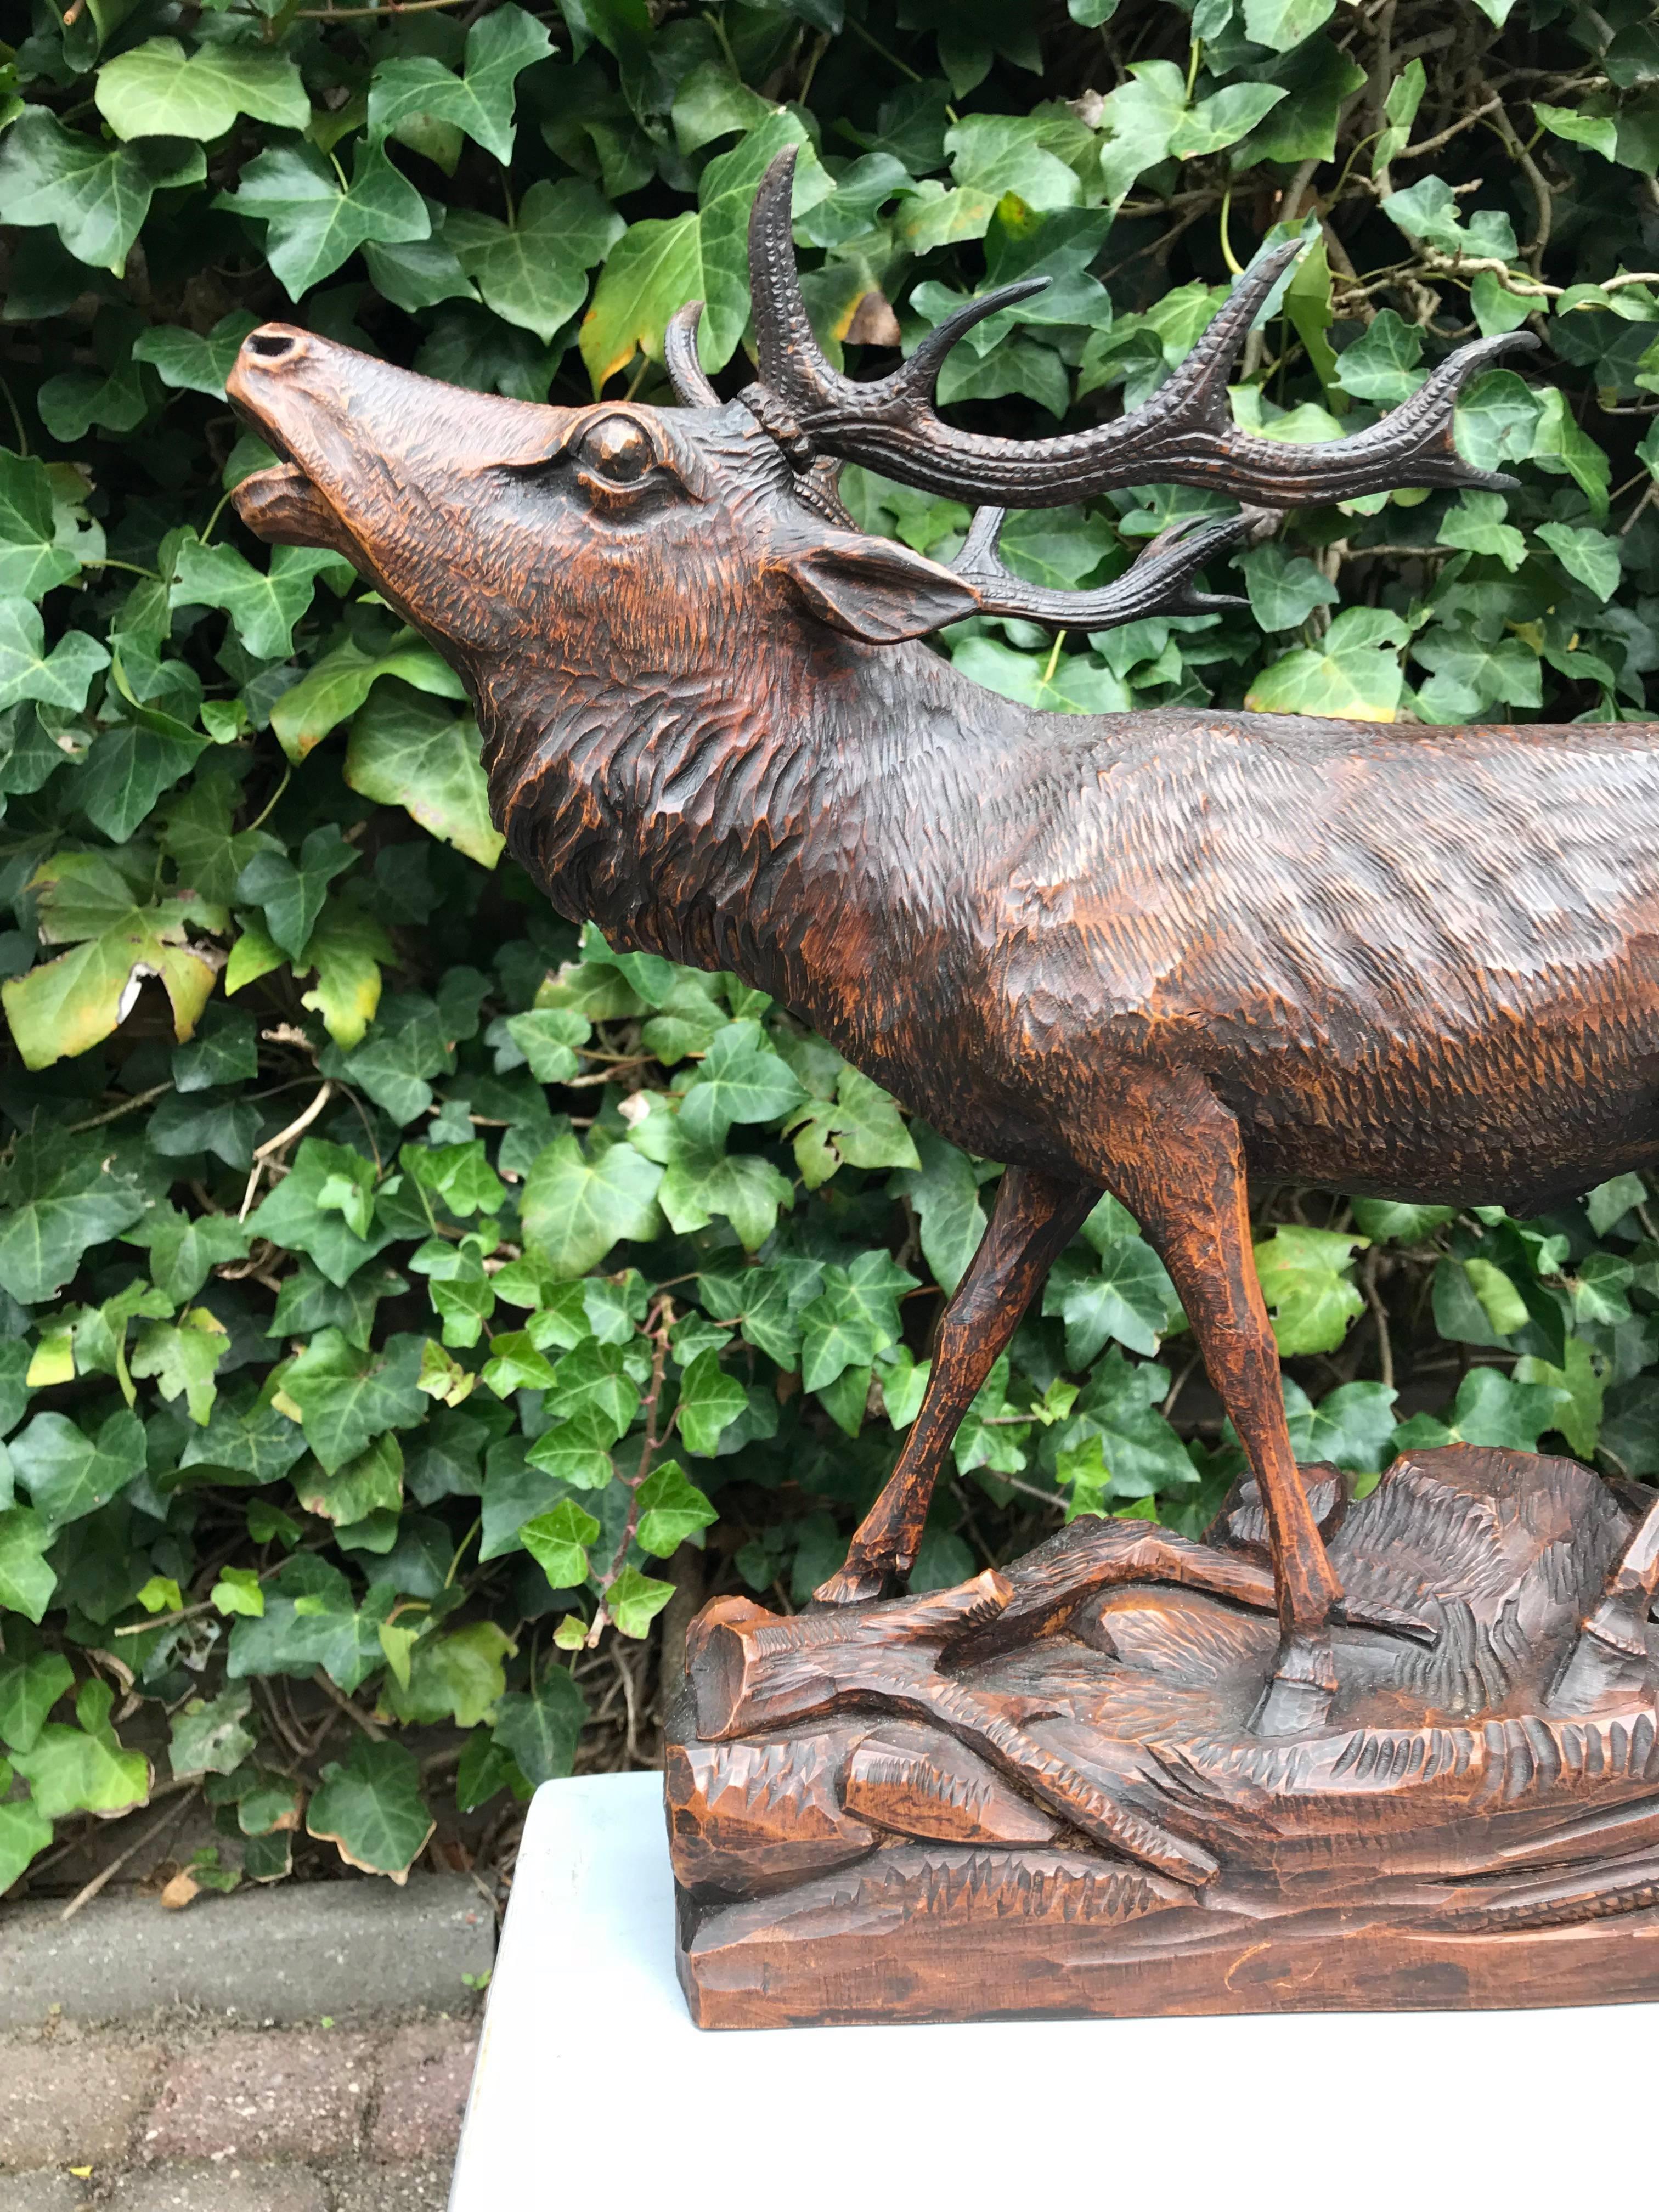 Good size and beautifully carved, wooden Black Forest stag sculpture.

From the posture it is obvious that this impressive stag, with his head turned up, is attempting to attract and impress any females that are in the vicinity. The other day, I